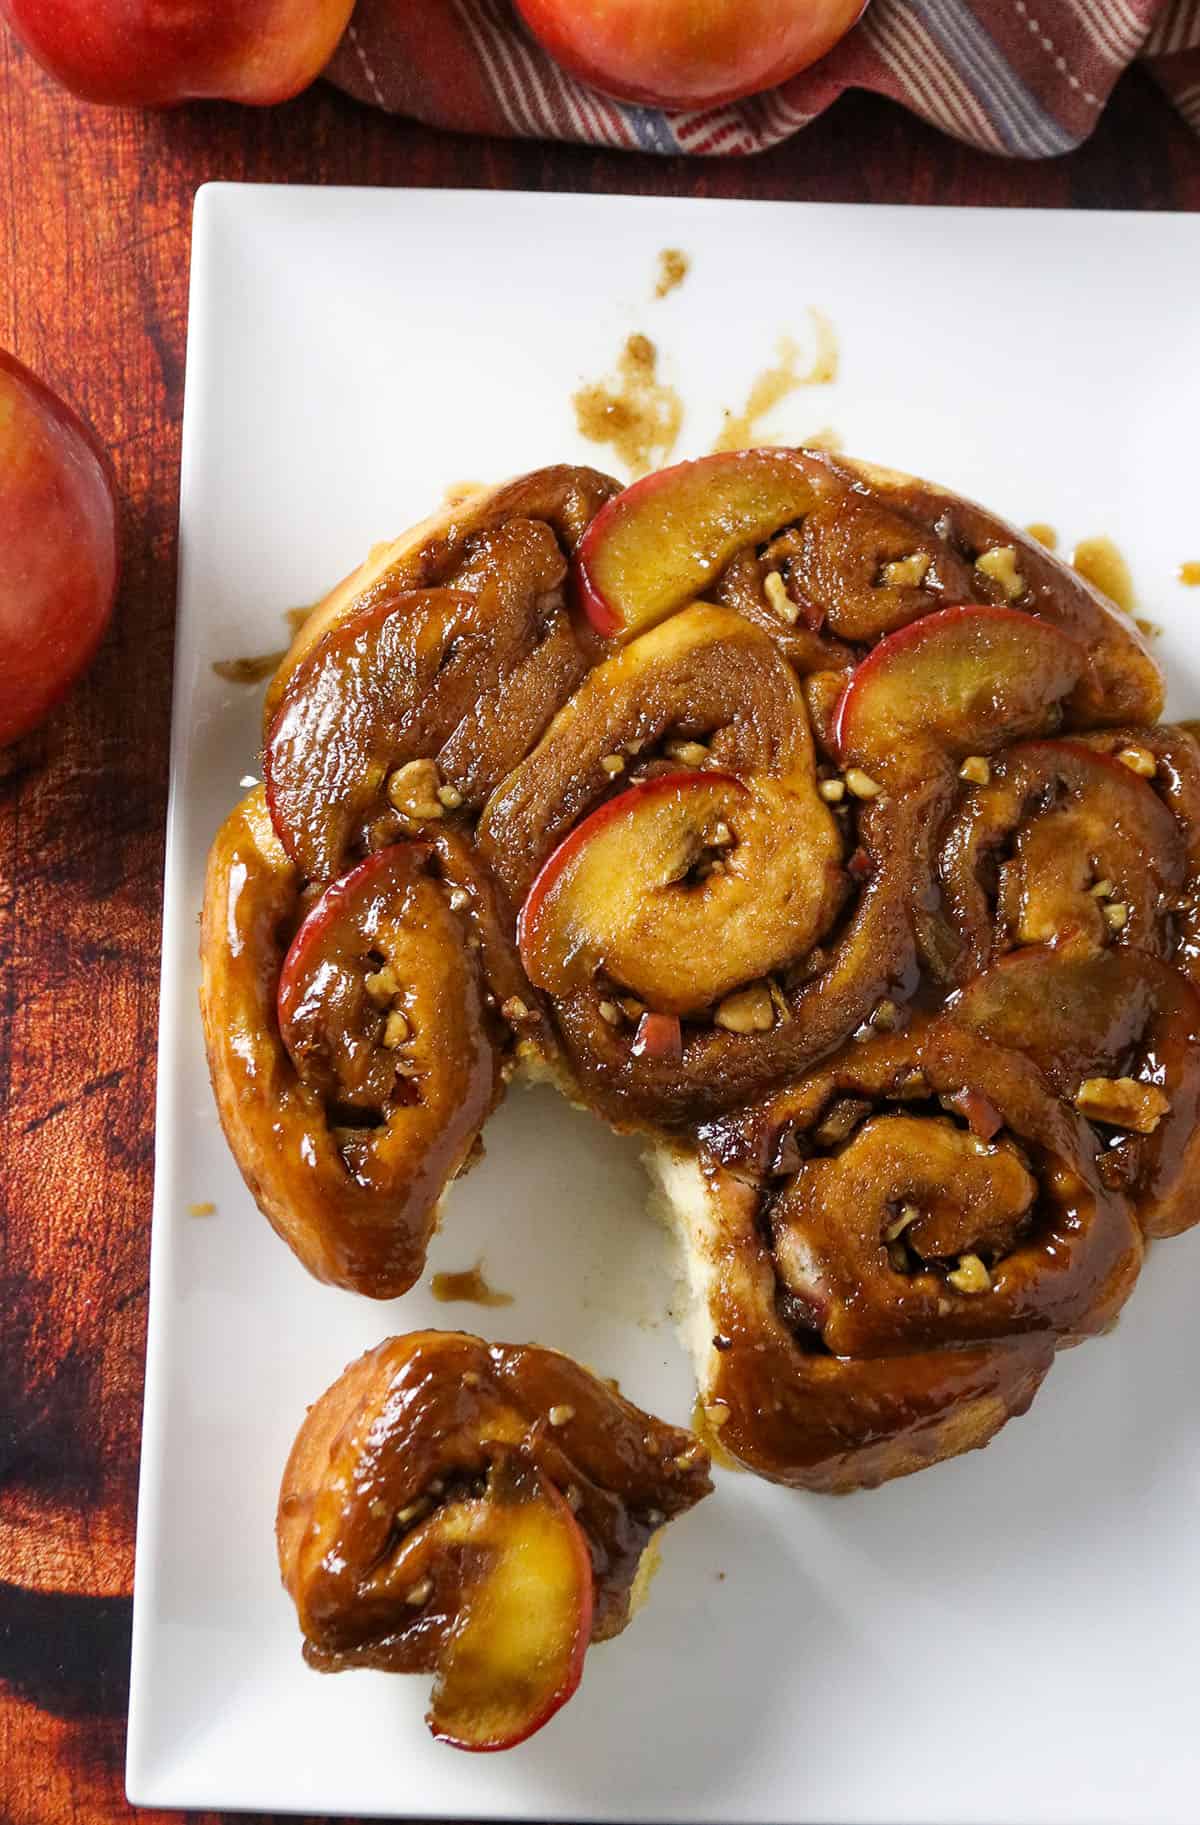 Top angle view of Apple Sticky buns on a serving plate.